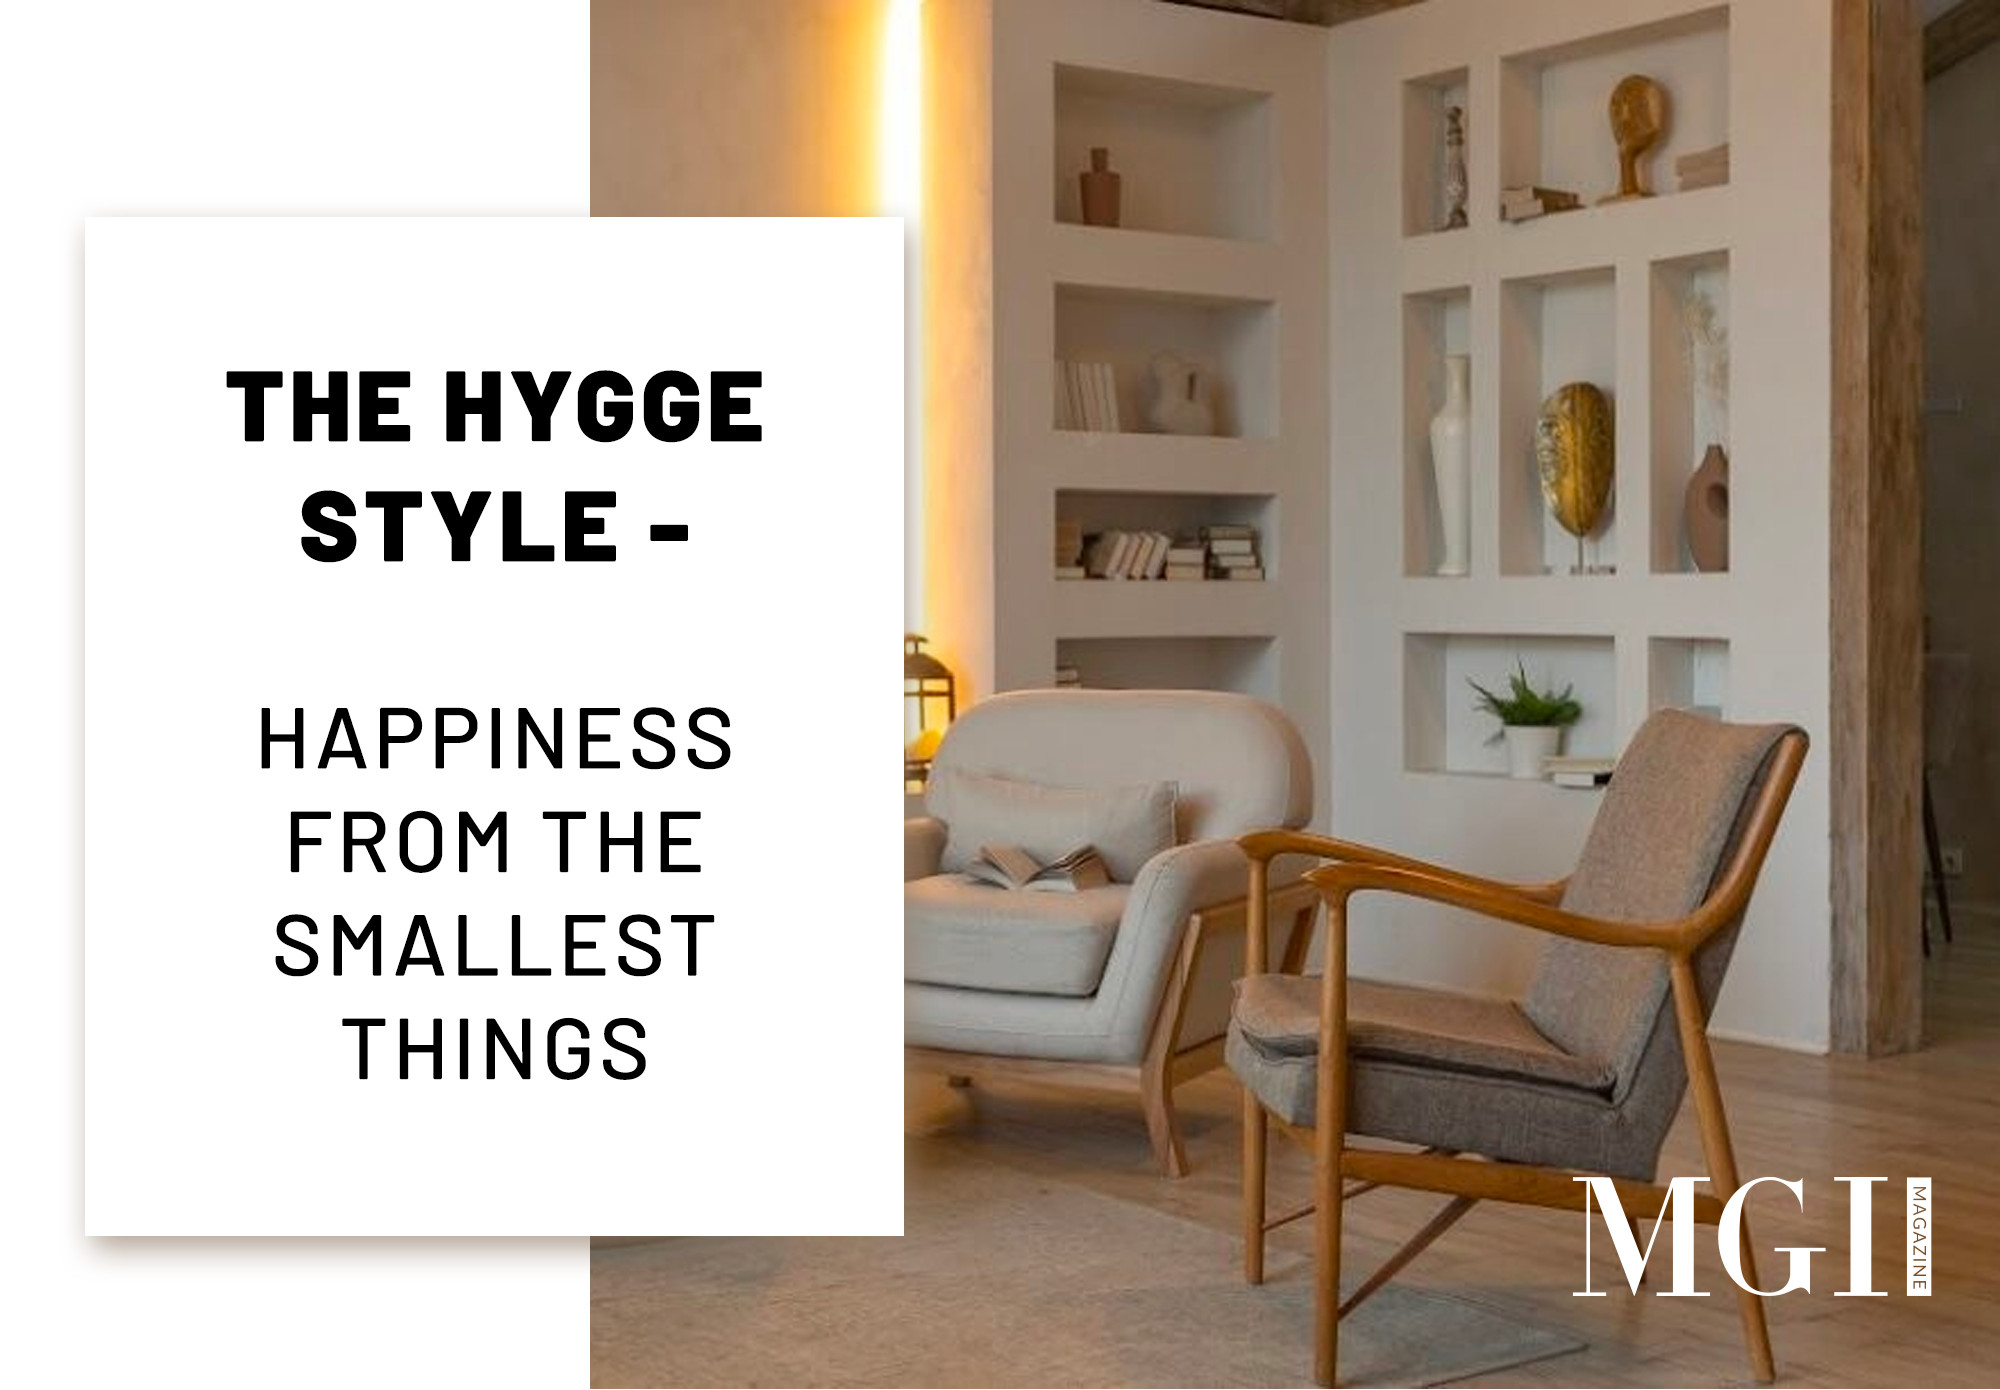 The Hygge Style - Happiness from the smallest things